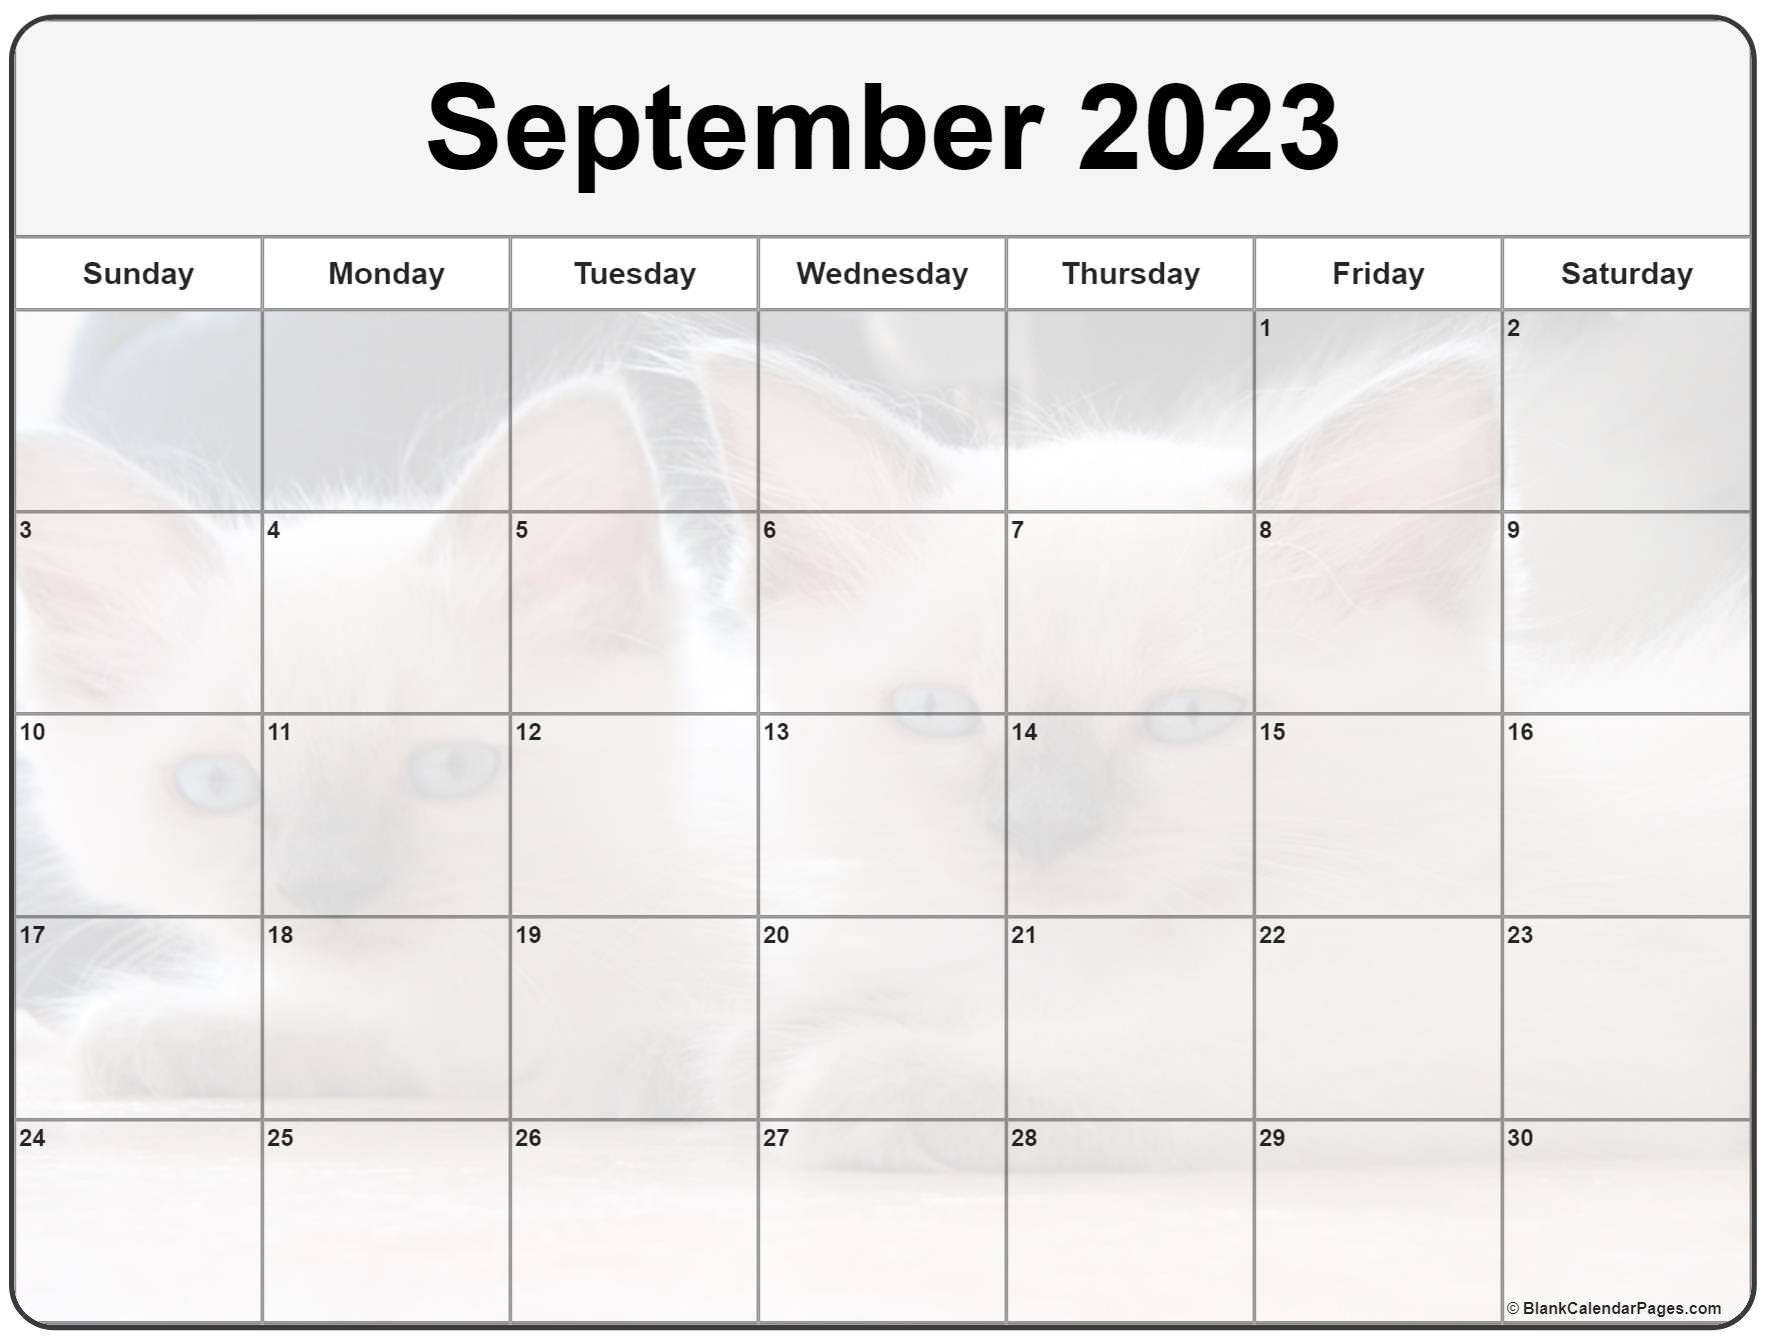 Collection Of September 2023 Photo Calendars With Image Filters.